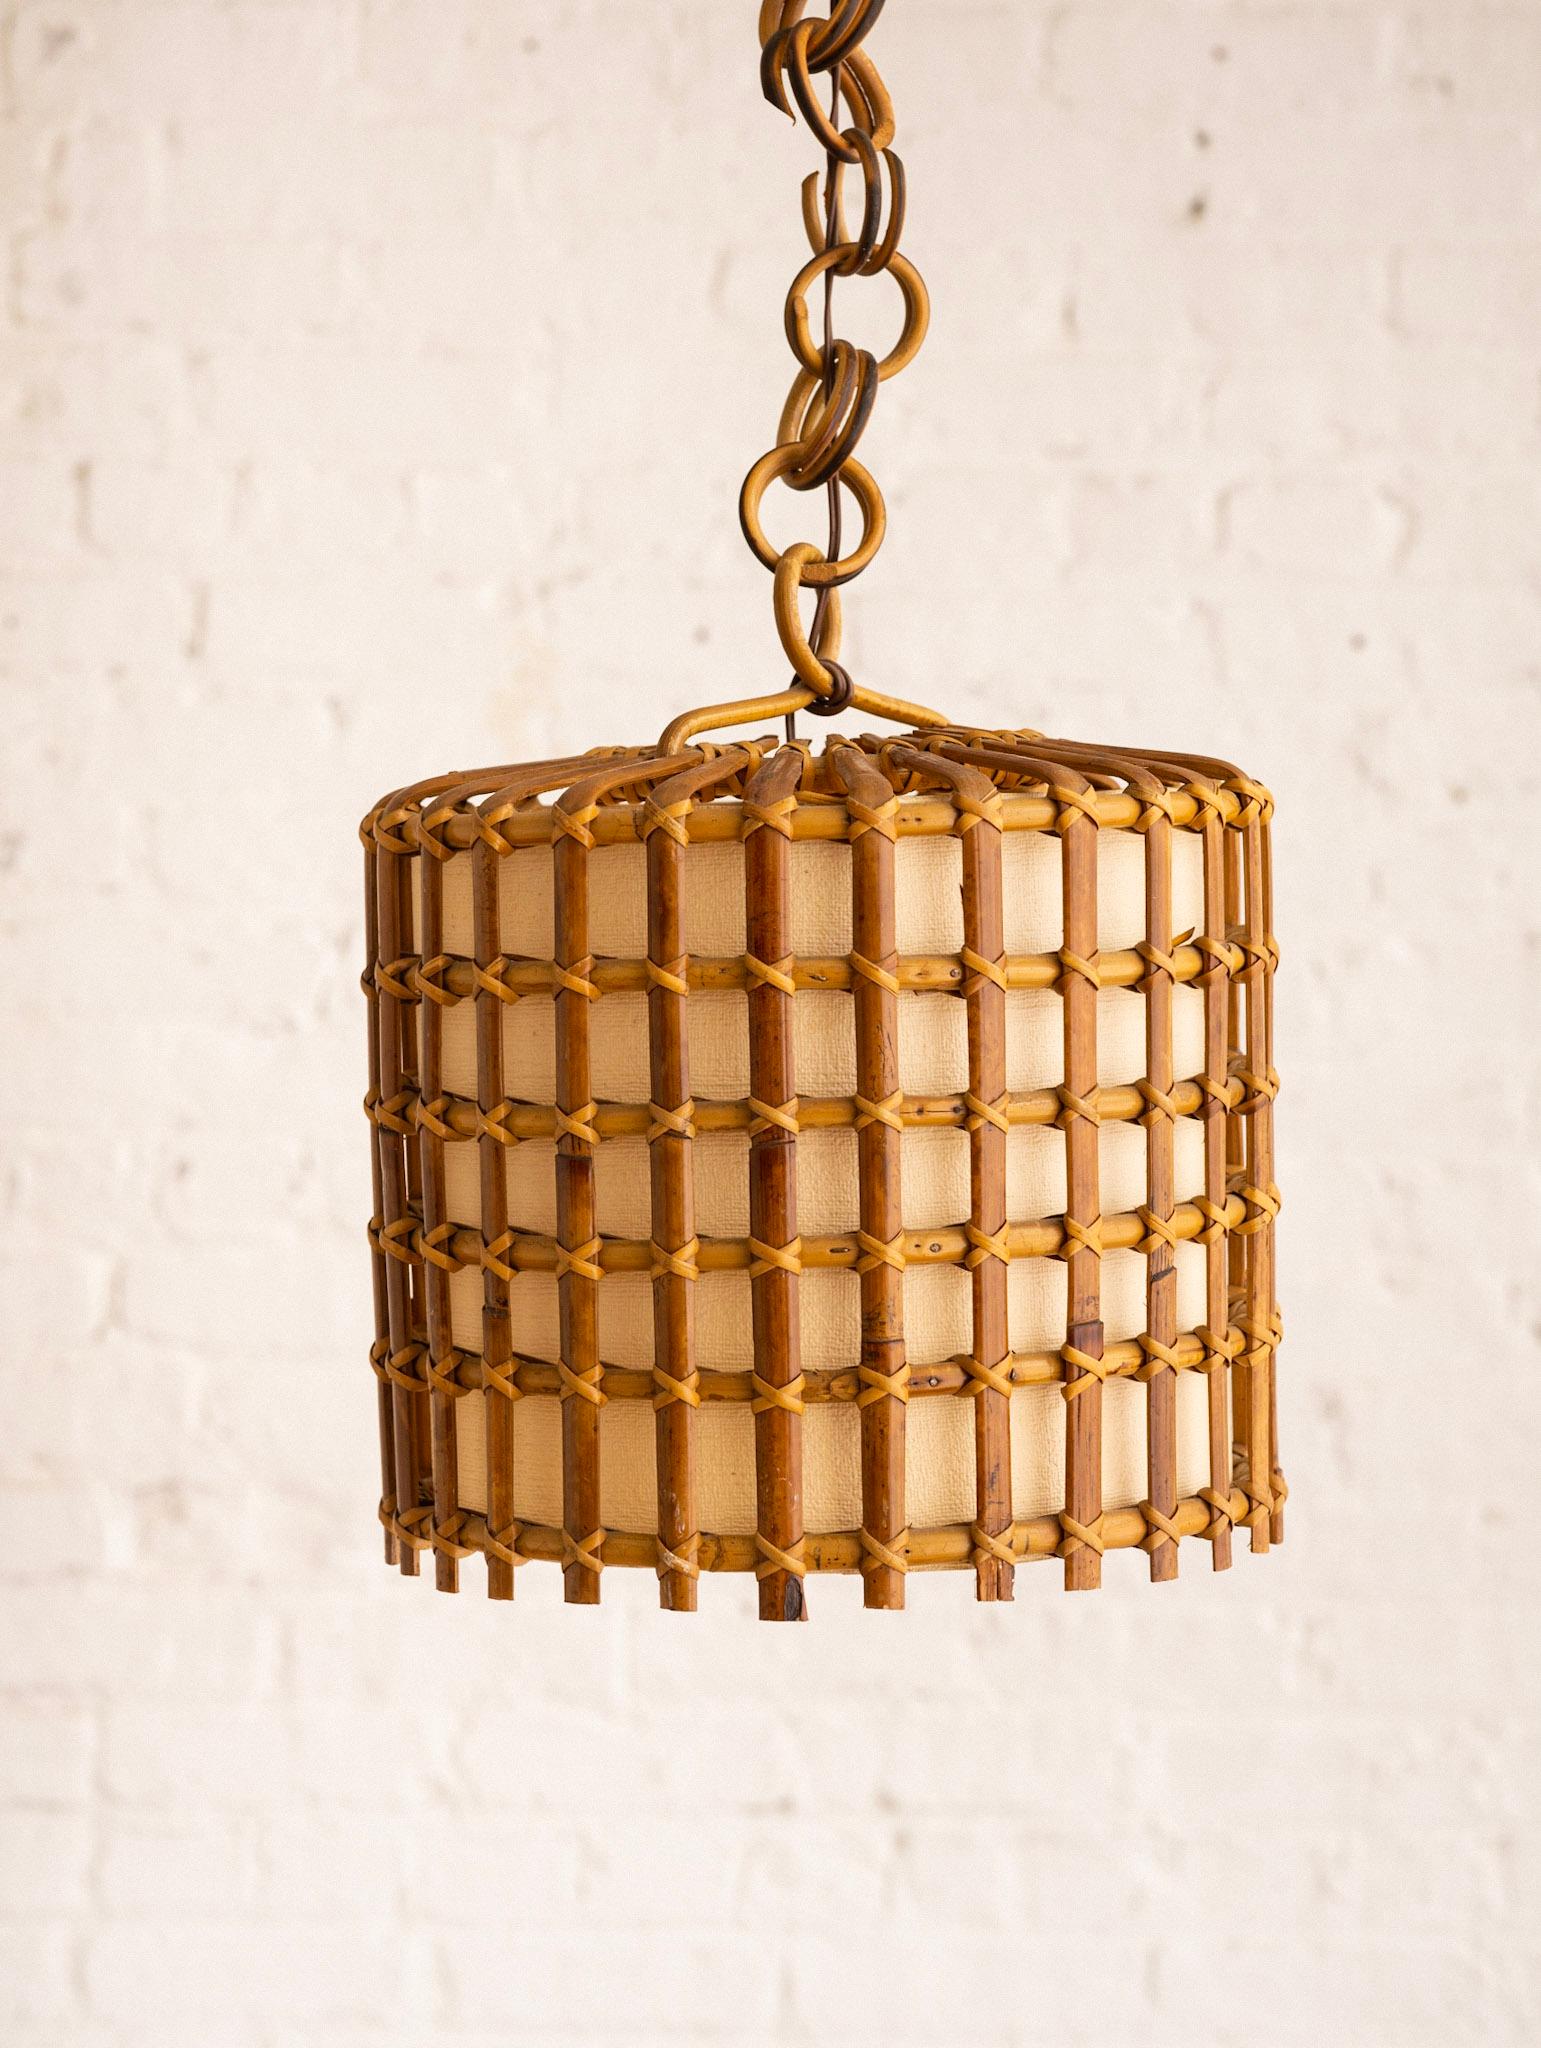 Mid century Italian pendant lamp with inner paper shade. Grid form, with rattan chain and rush ceiling canopy. Sourced outside of Florence, Italy.

Additional Measurements:
37” in height total with rattan links and canopy.
Links and canopy add